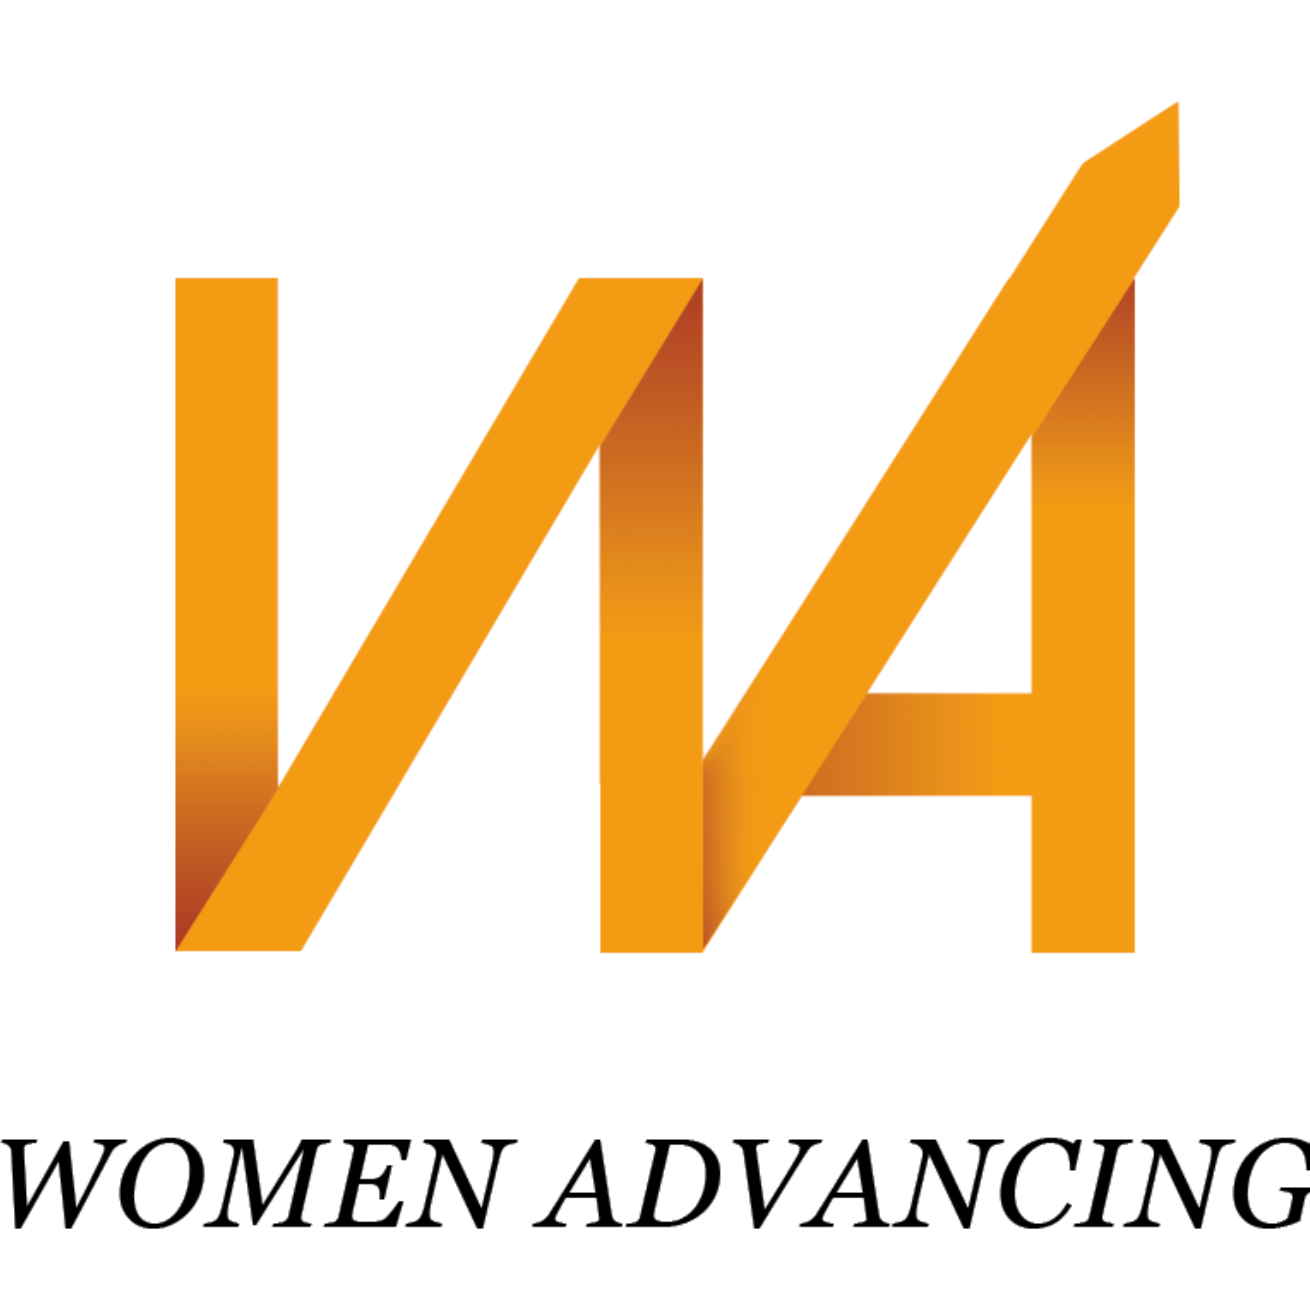 Women Advancing offers an inclusive & supportive environment to women at all stages of their careers for mentoring & connections.